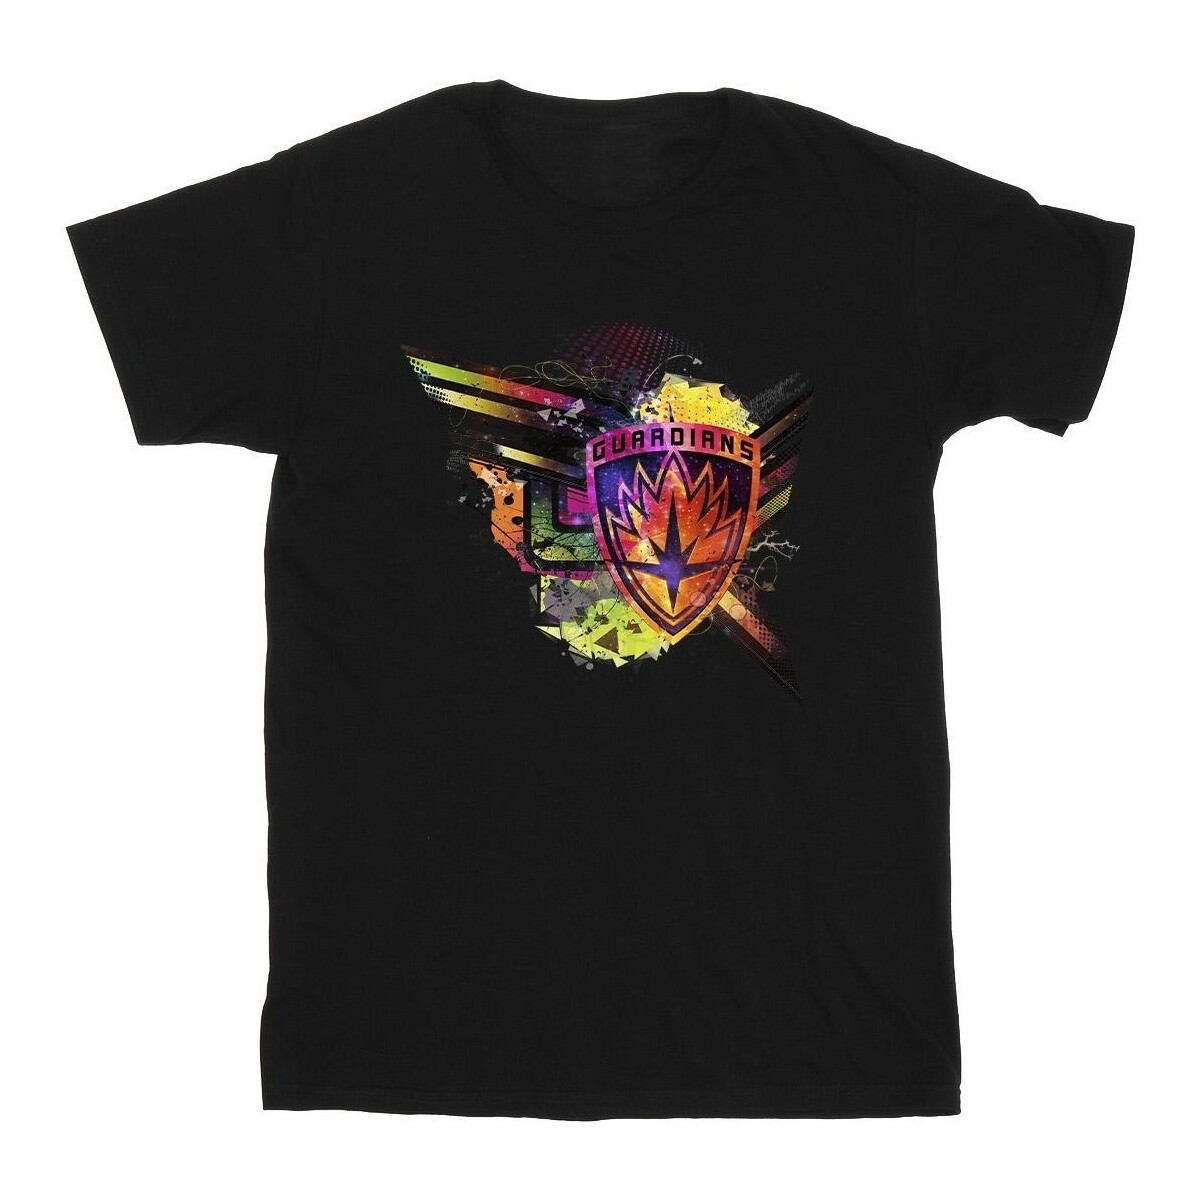 Vêtements Fille T-shirts manches longues Marvel Guardians Of The Galaxy Abstract Shield Chest Noir